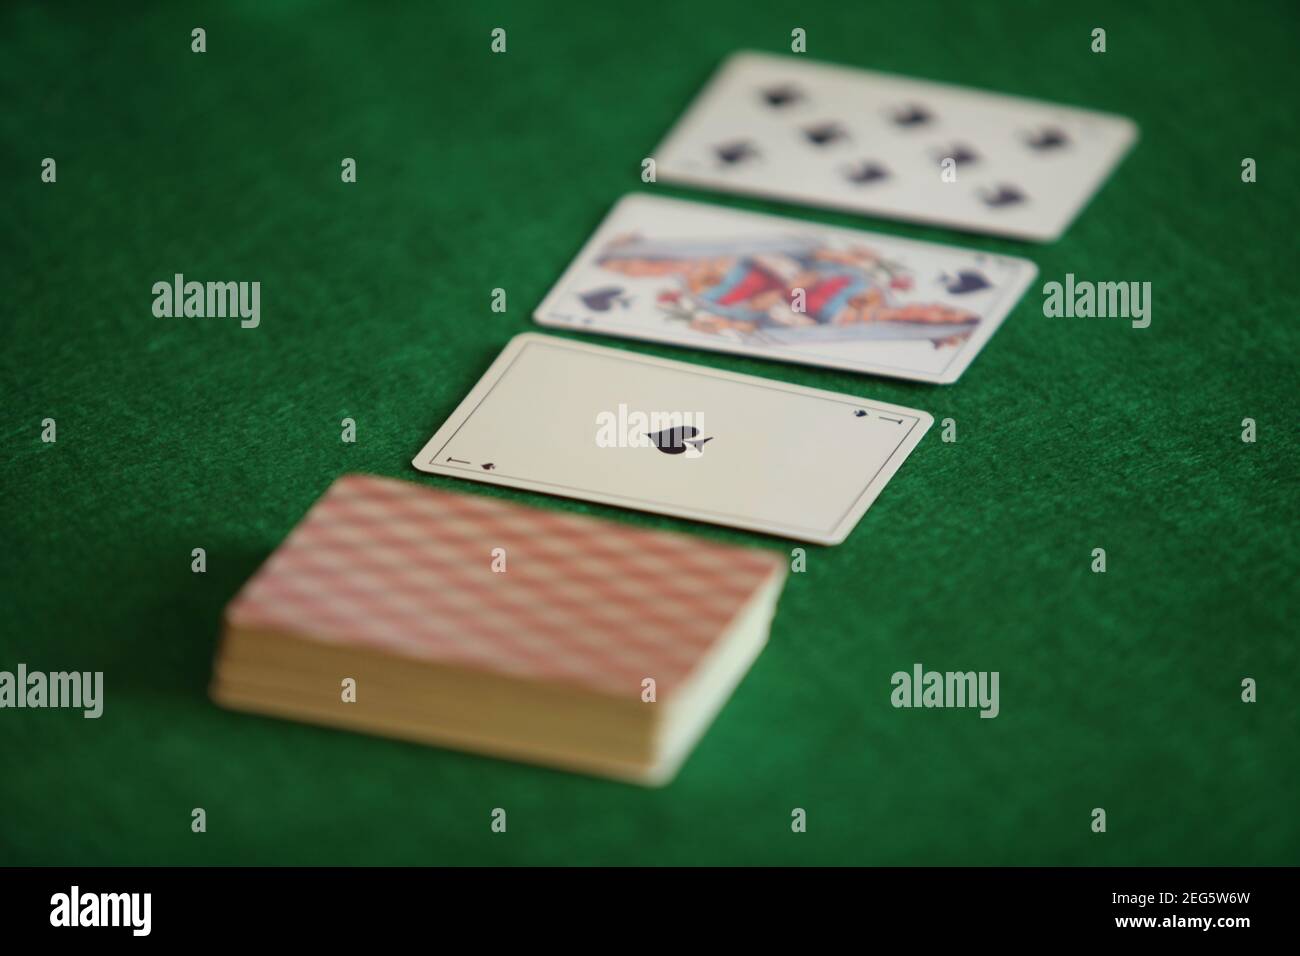 deck of playing cards on a green gaming table Stock Photo